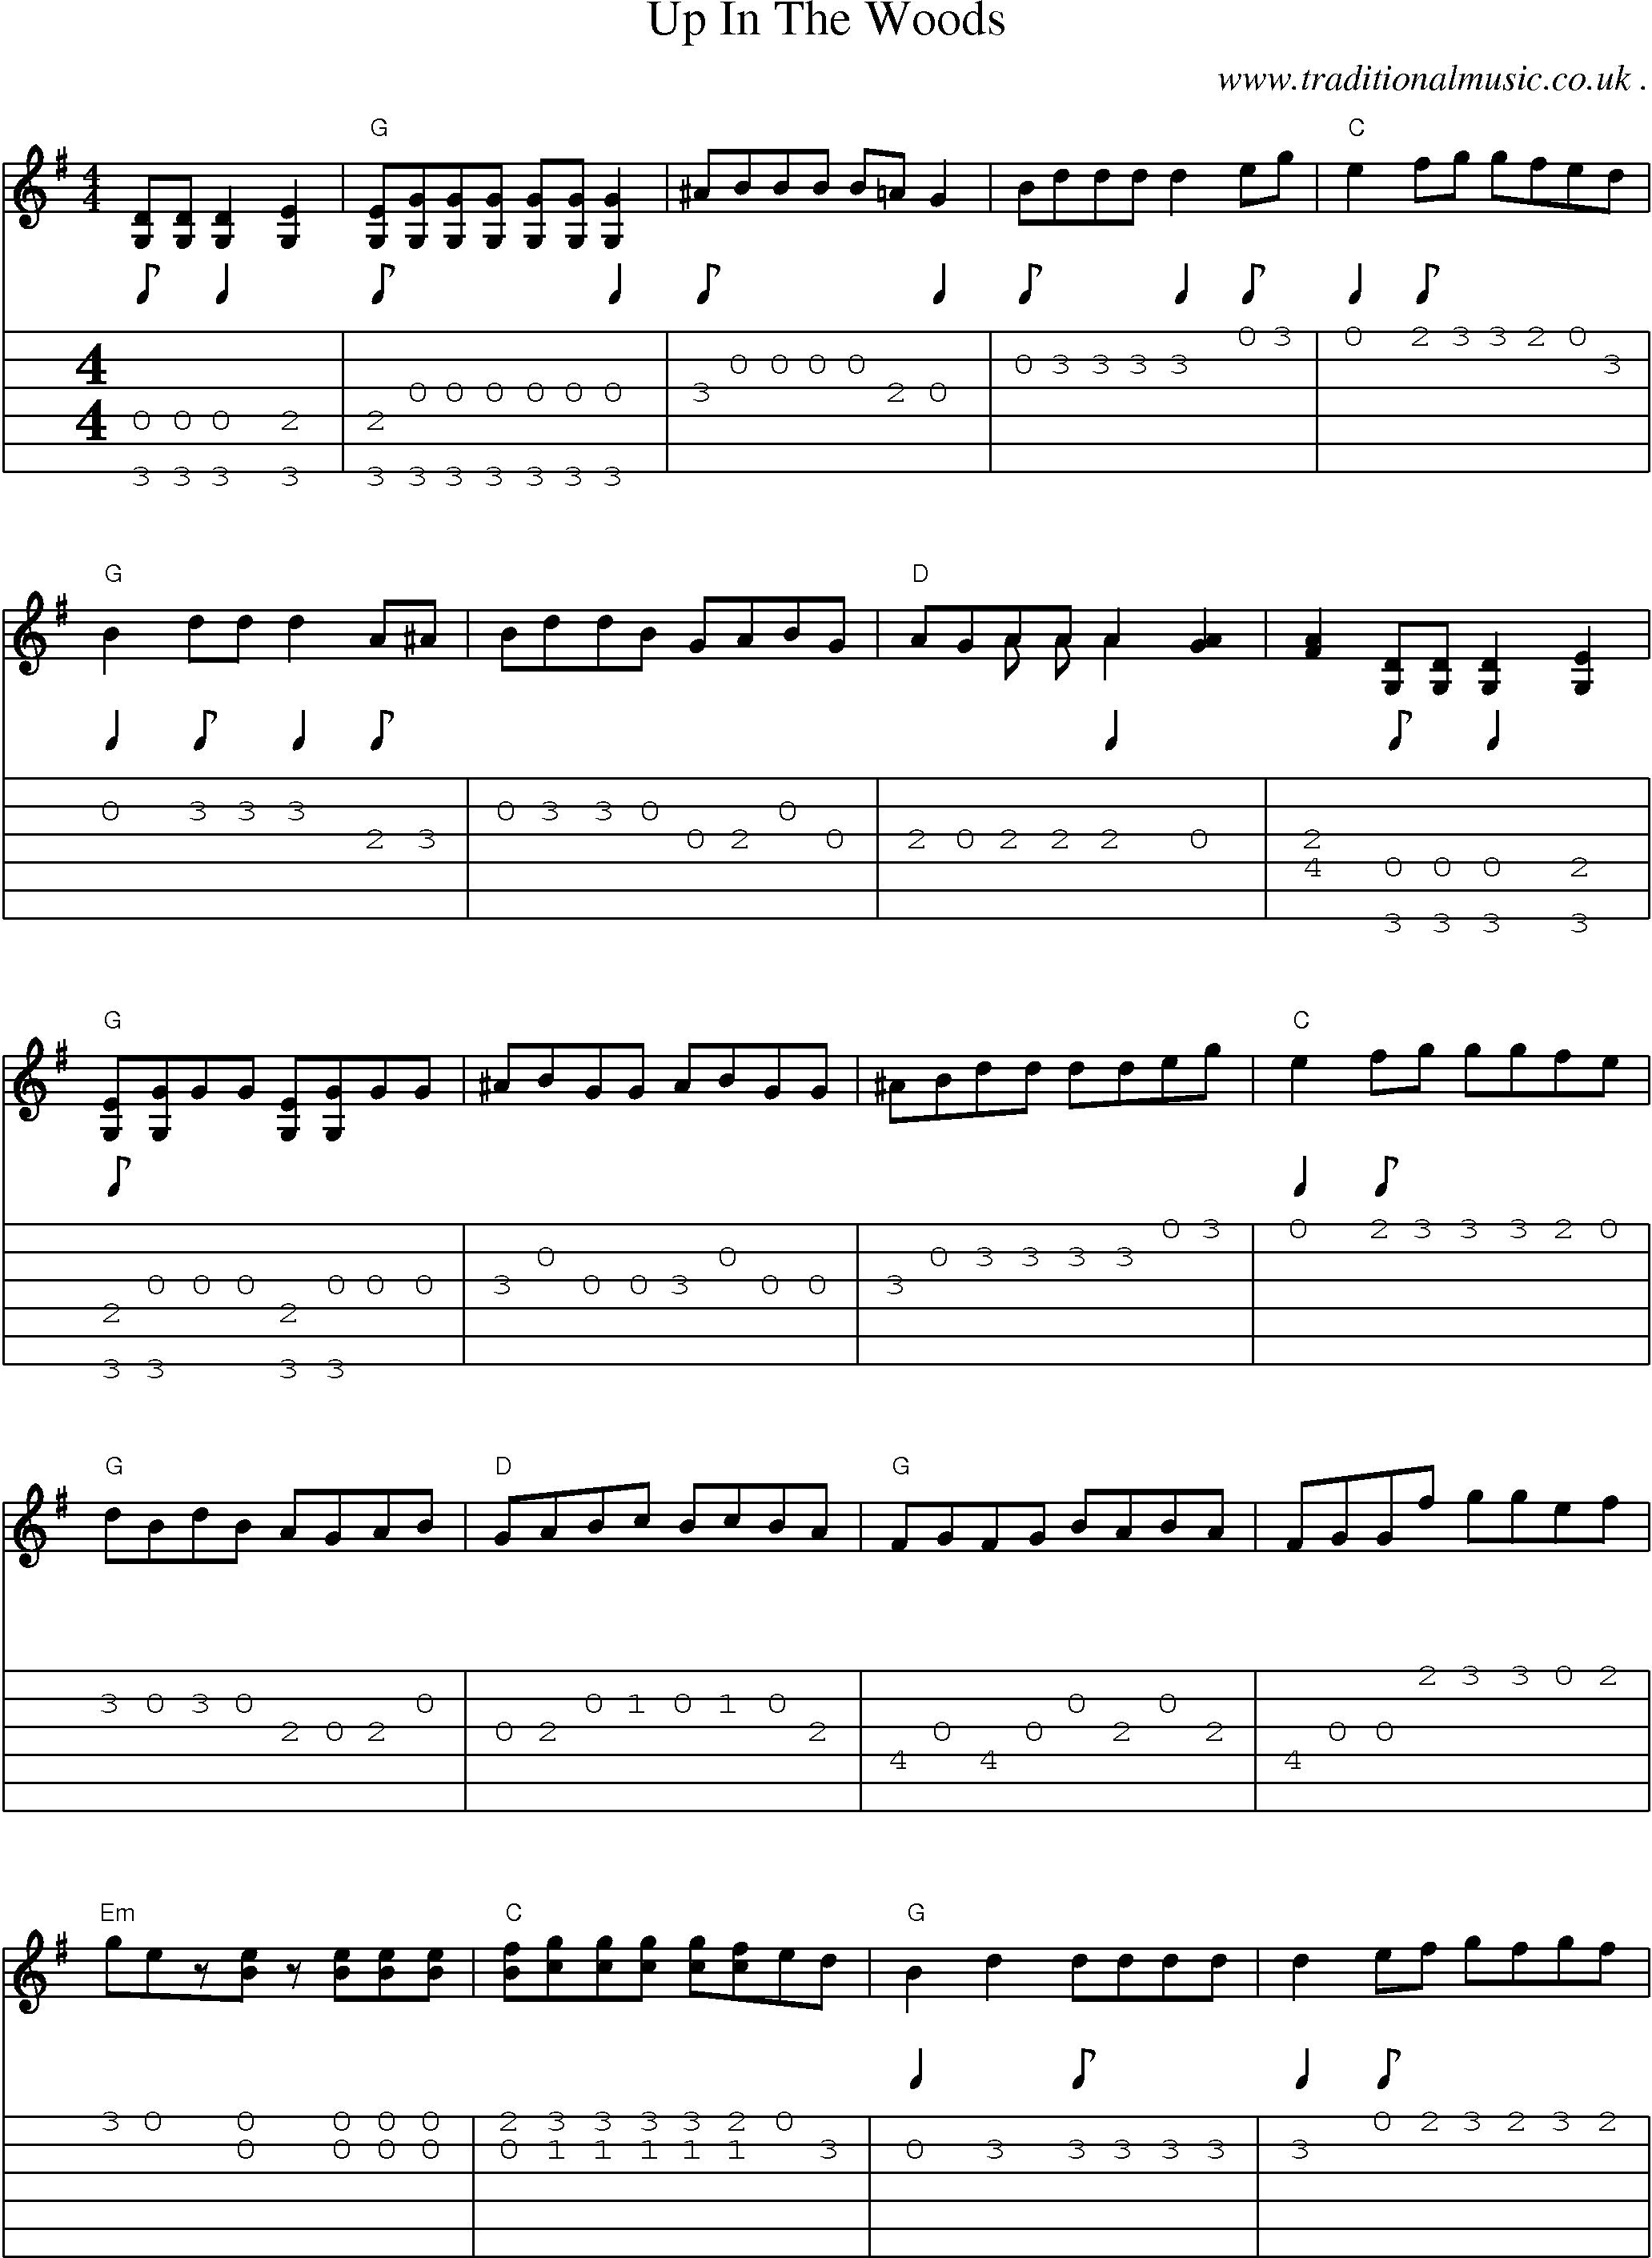 Music Score and Guitar Tabs for Up In The Woods